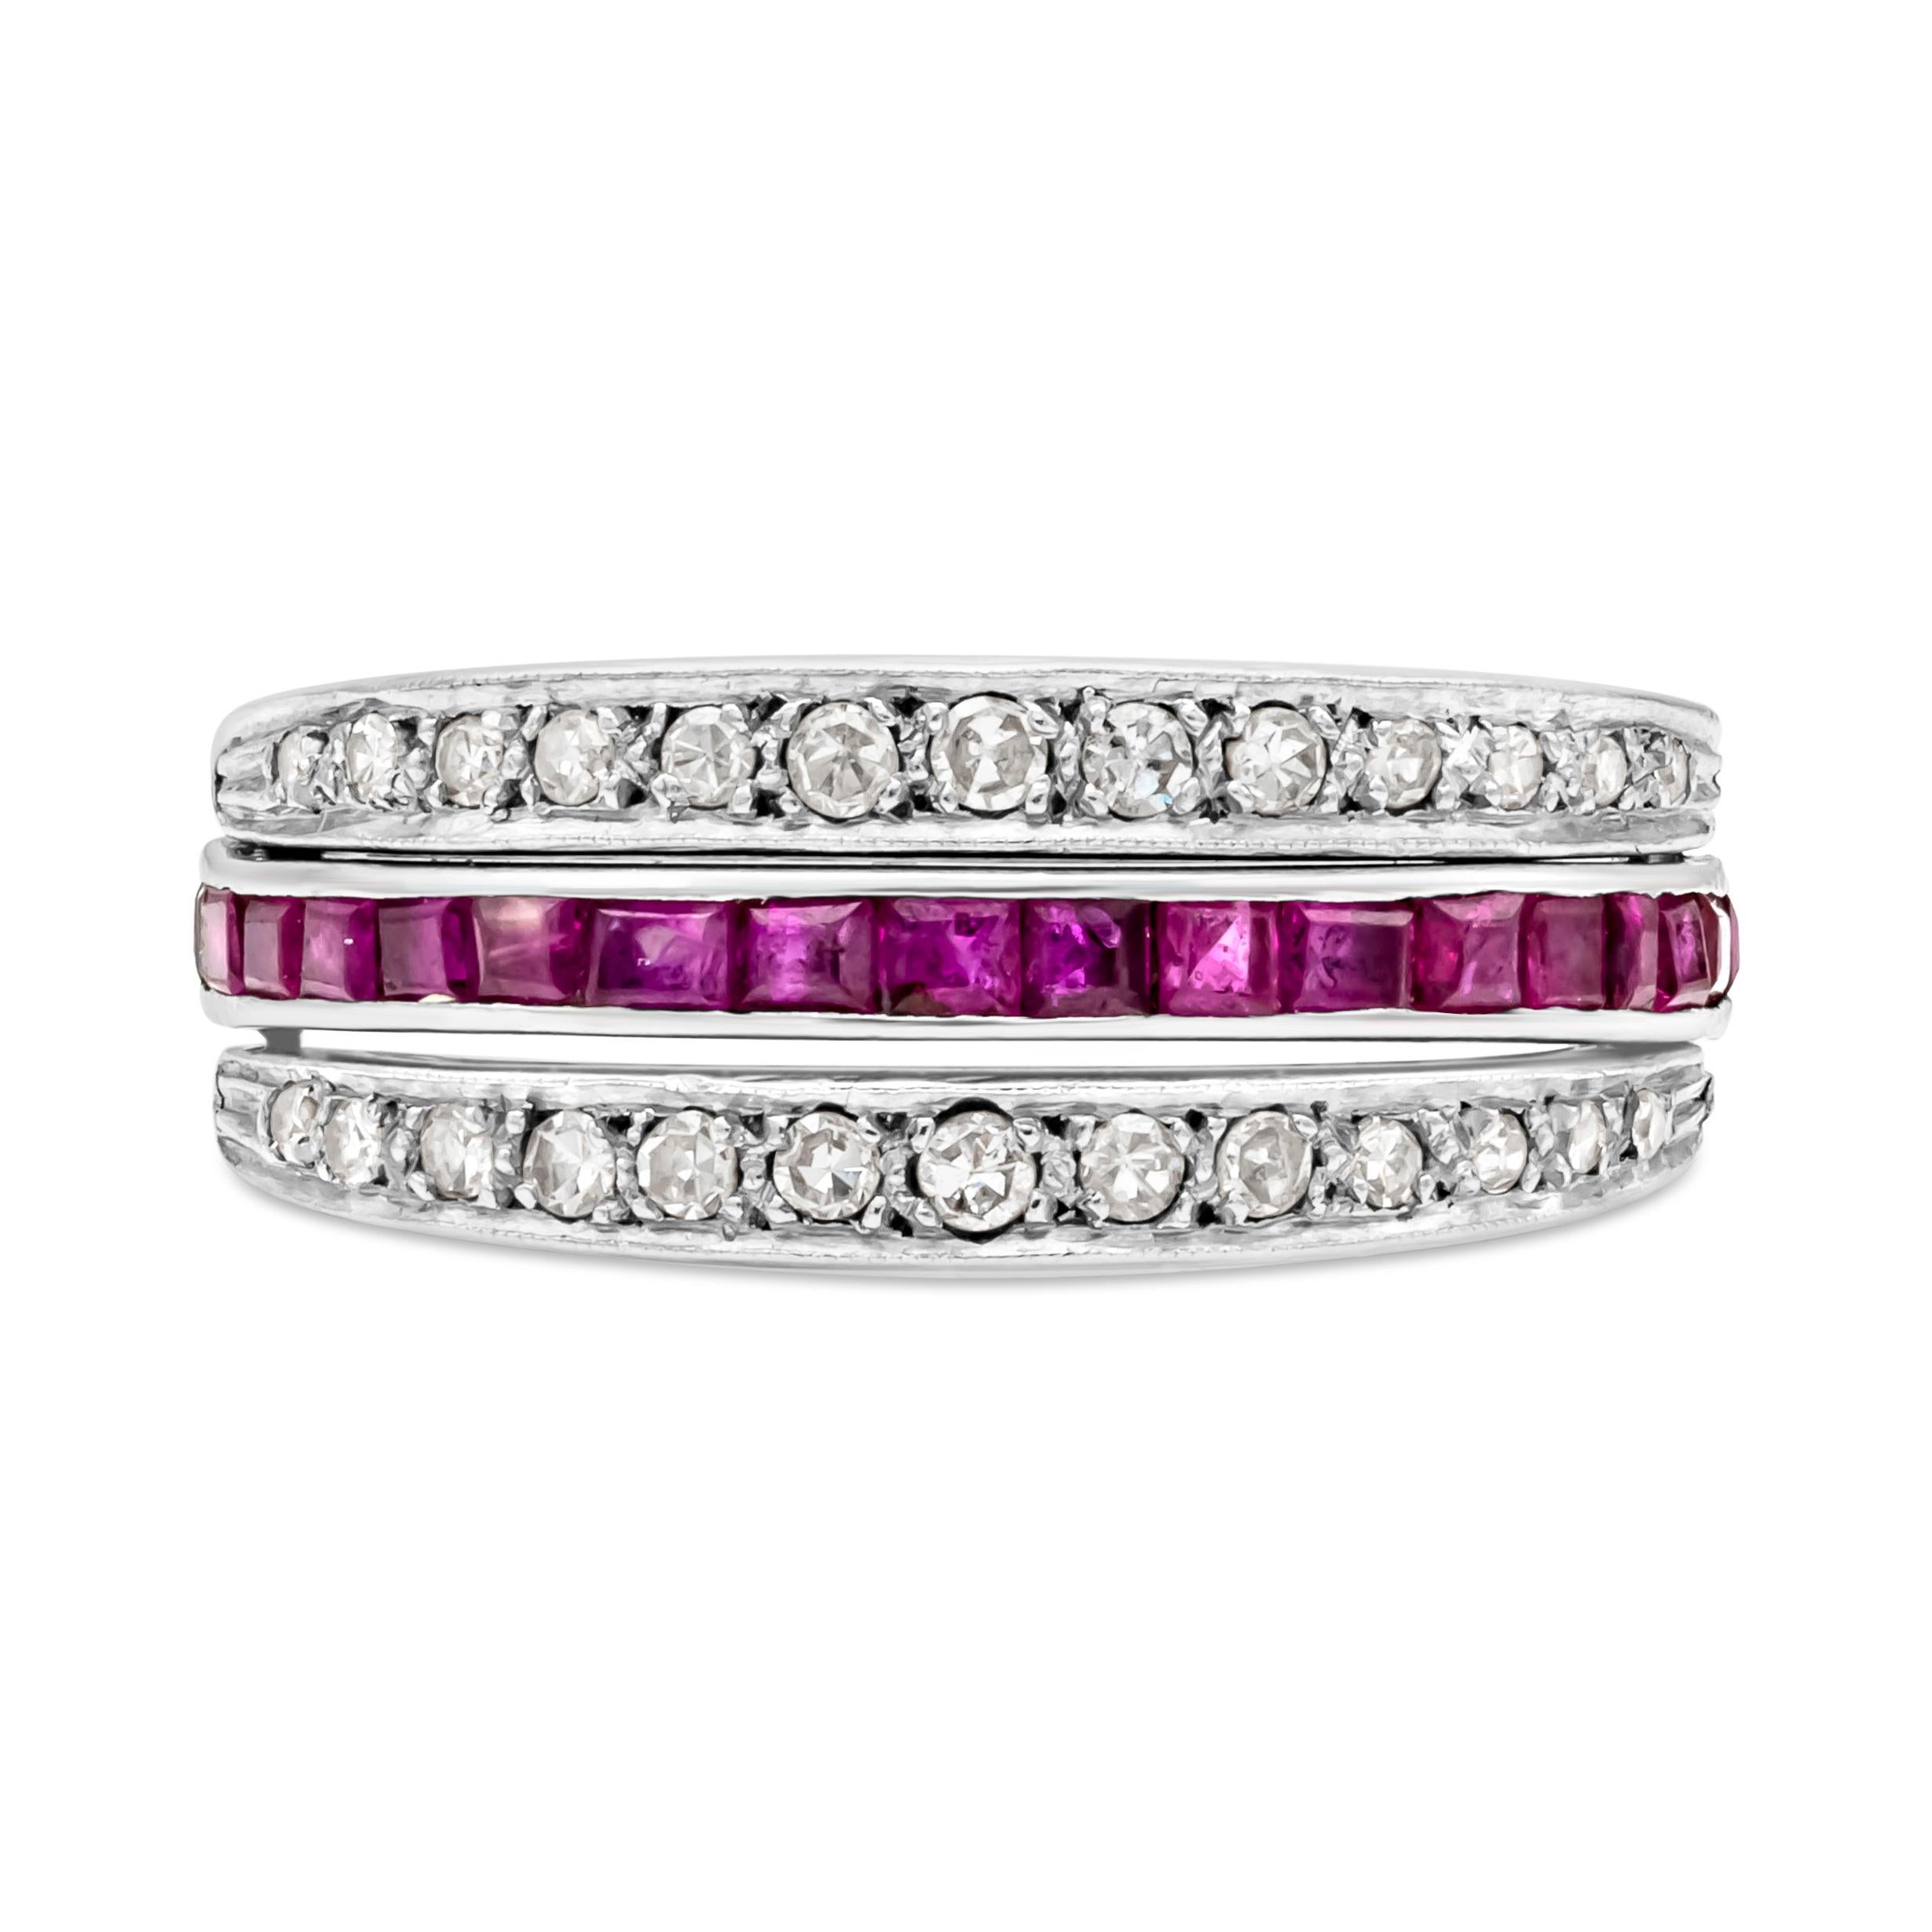 The antique art deco style eternity wedding band showcasing baguette cut half sapphires and half ruby weighing 1.70 carats total and encrusted with brilliant round cut diamonds weighing 0.45 carats total, set in a swivel design. Finely made in